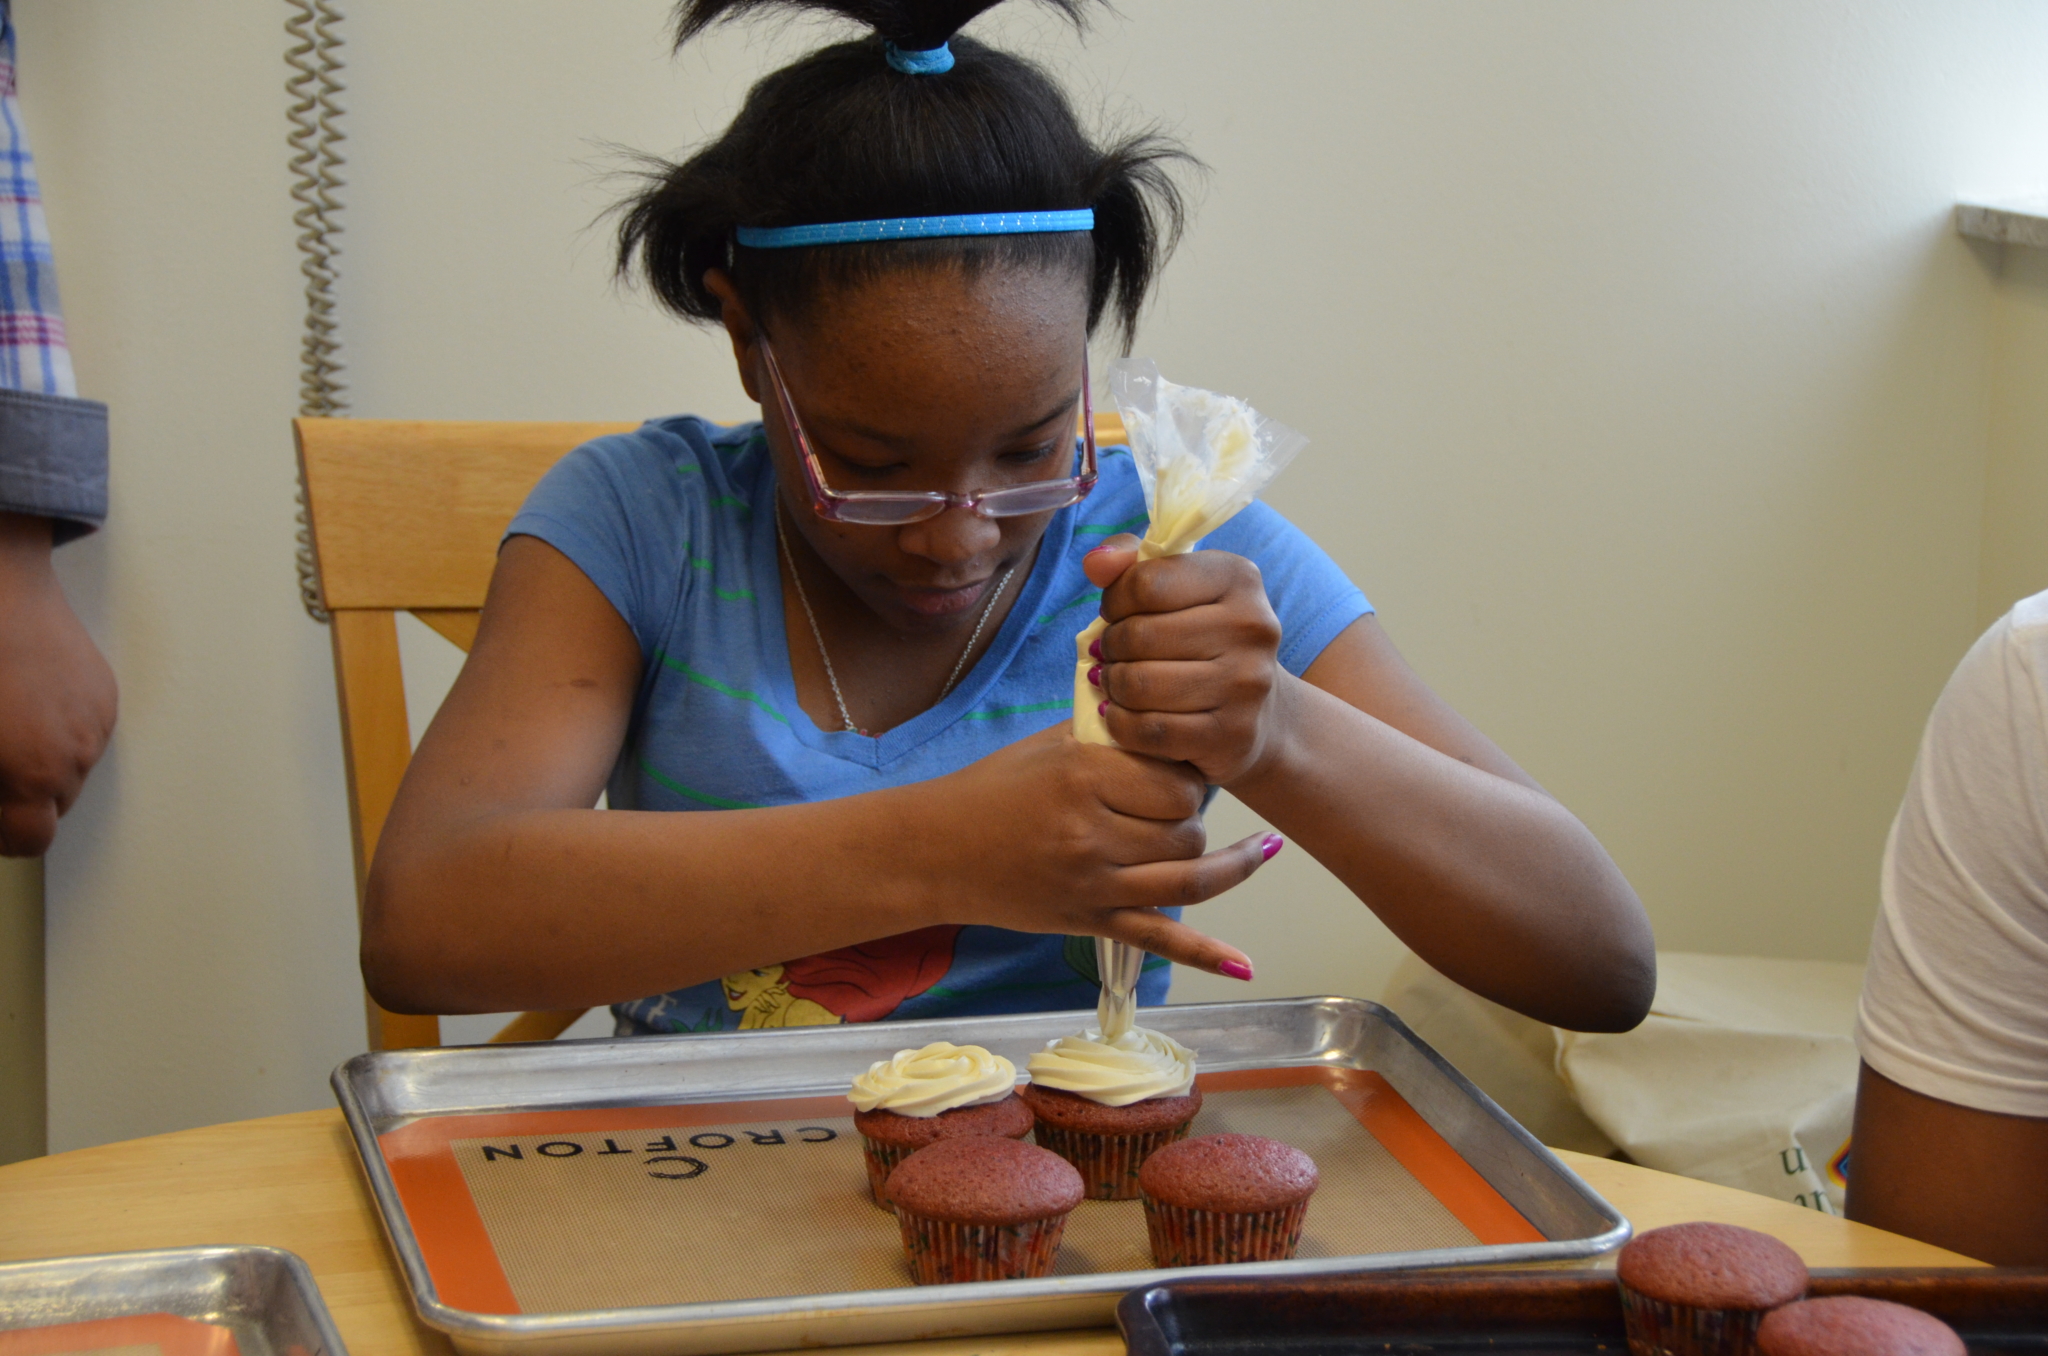 Youth decorating cupcakes